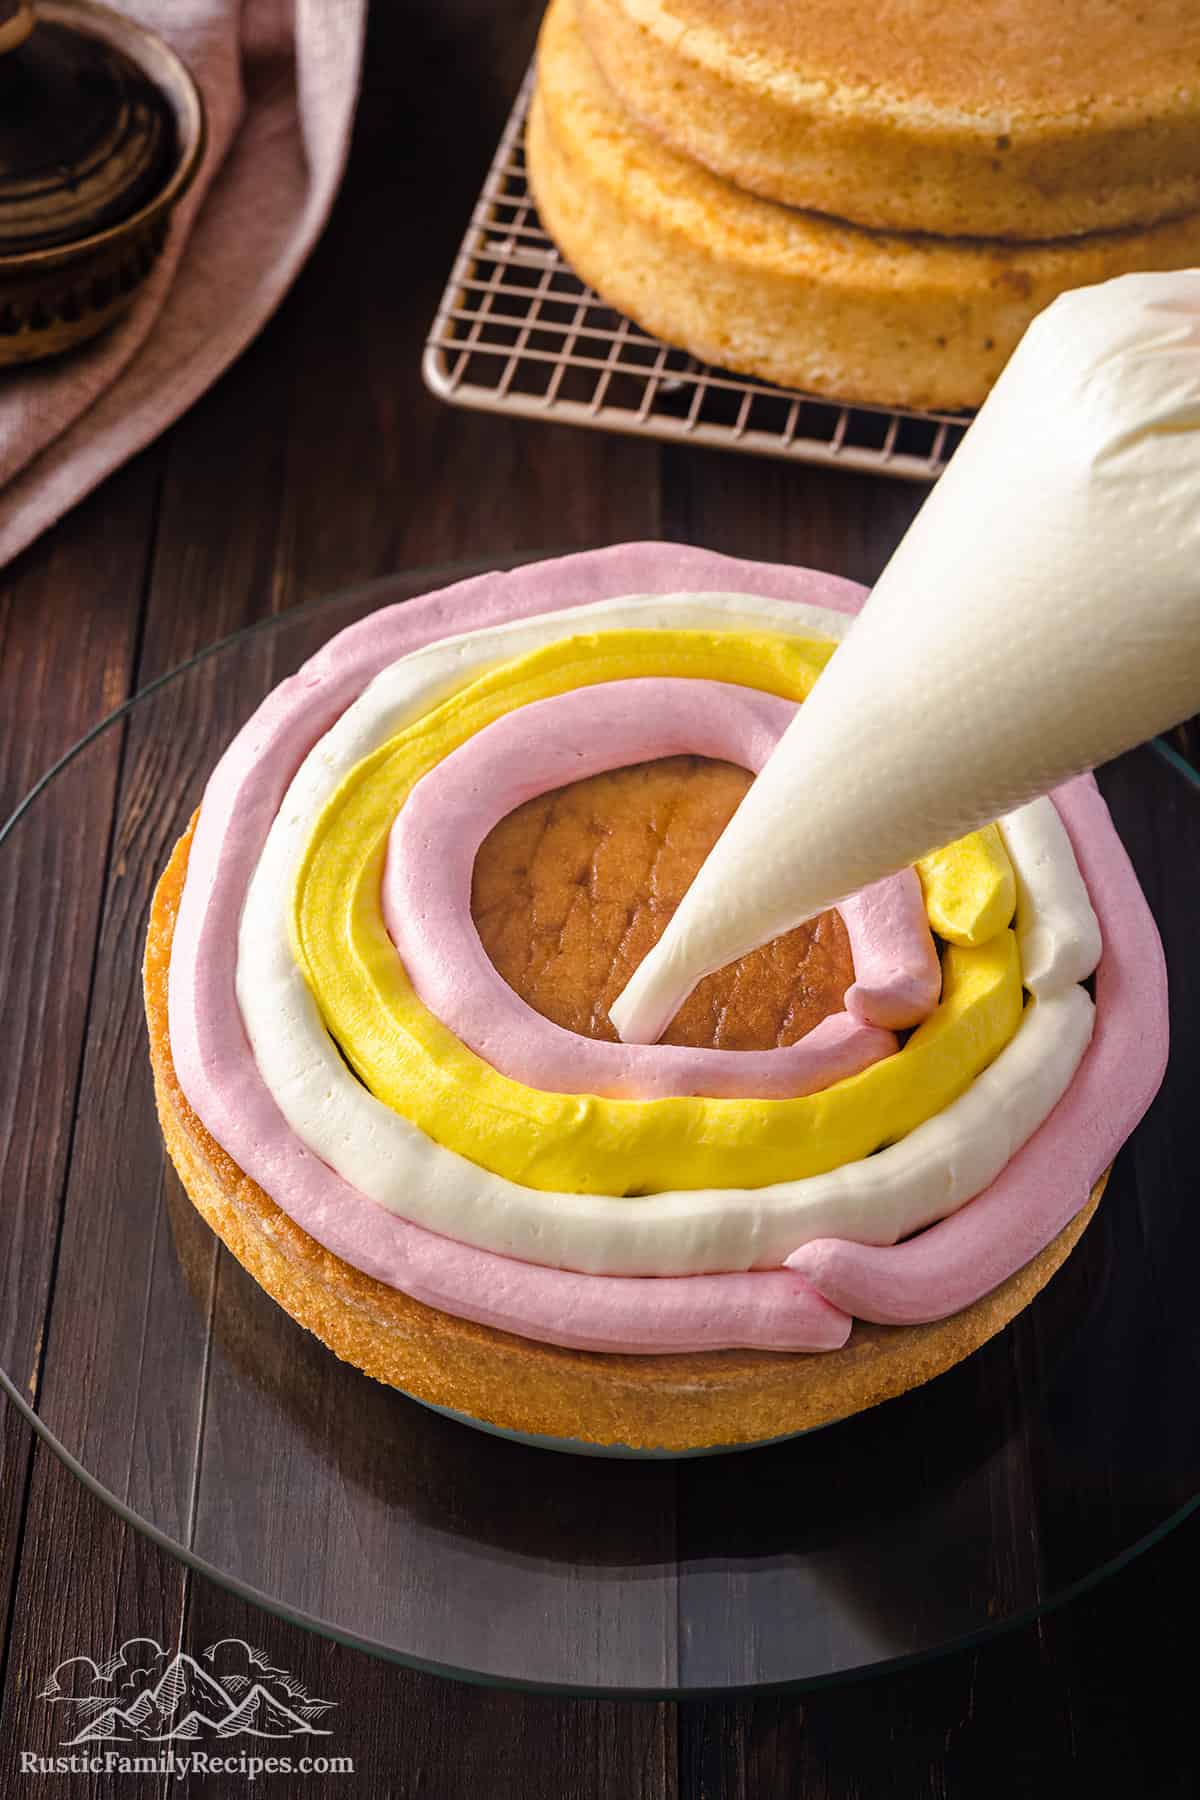 Piping white, pink and yellow frosting in between cake layers